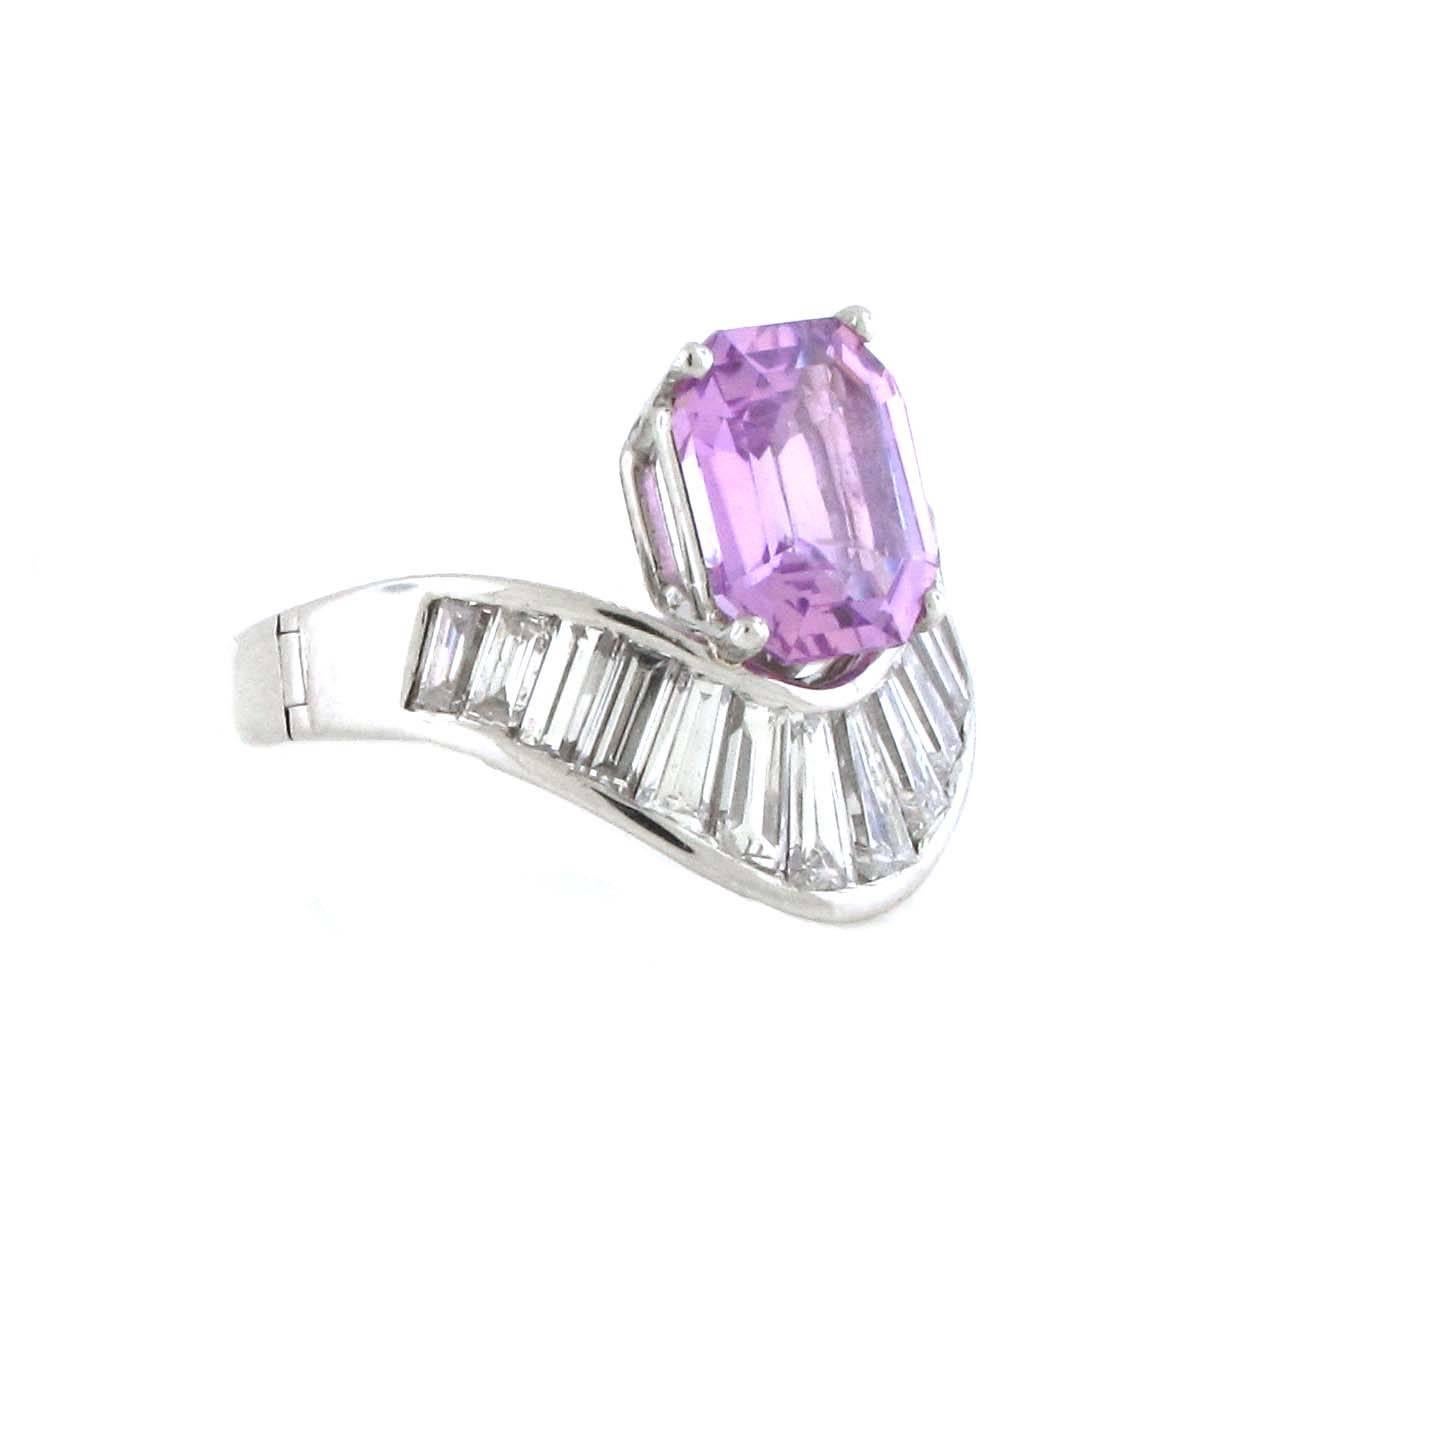 Fantastic customer 3.13 No Heat Ceylon Purple Emerald Cut Sapphire and diamond ring. It is very rare for an emerald cut purple sapphire to have this much color saturation and to be this clean of a stone. This stone has also not been heat treated